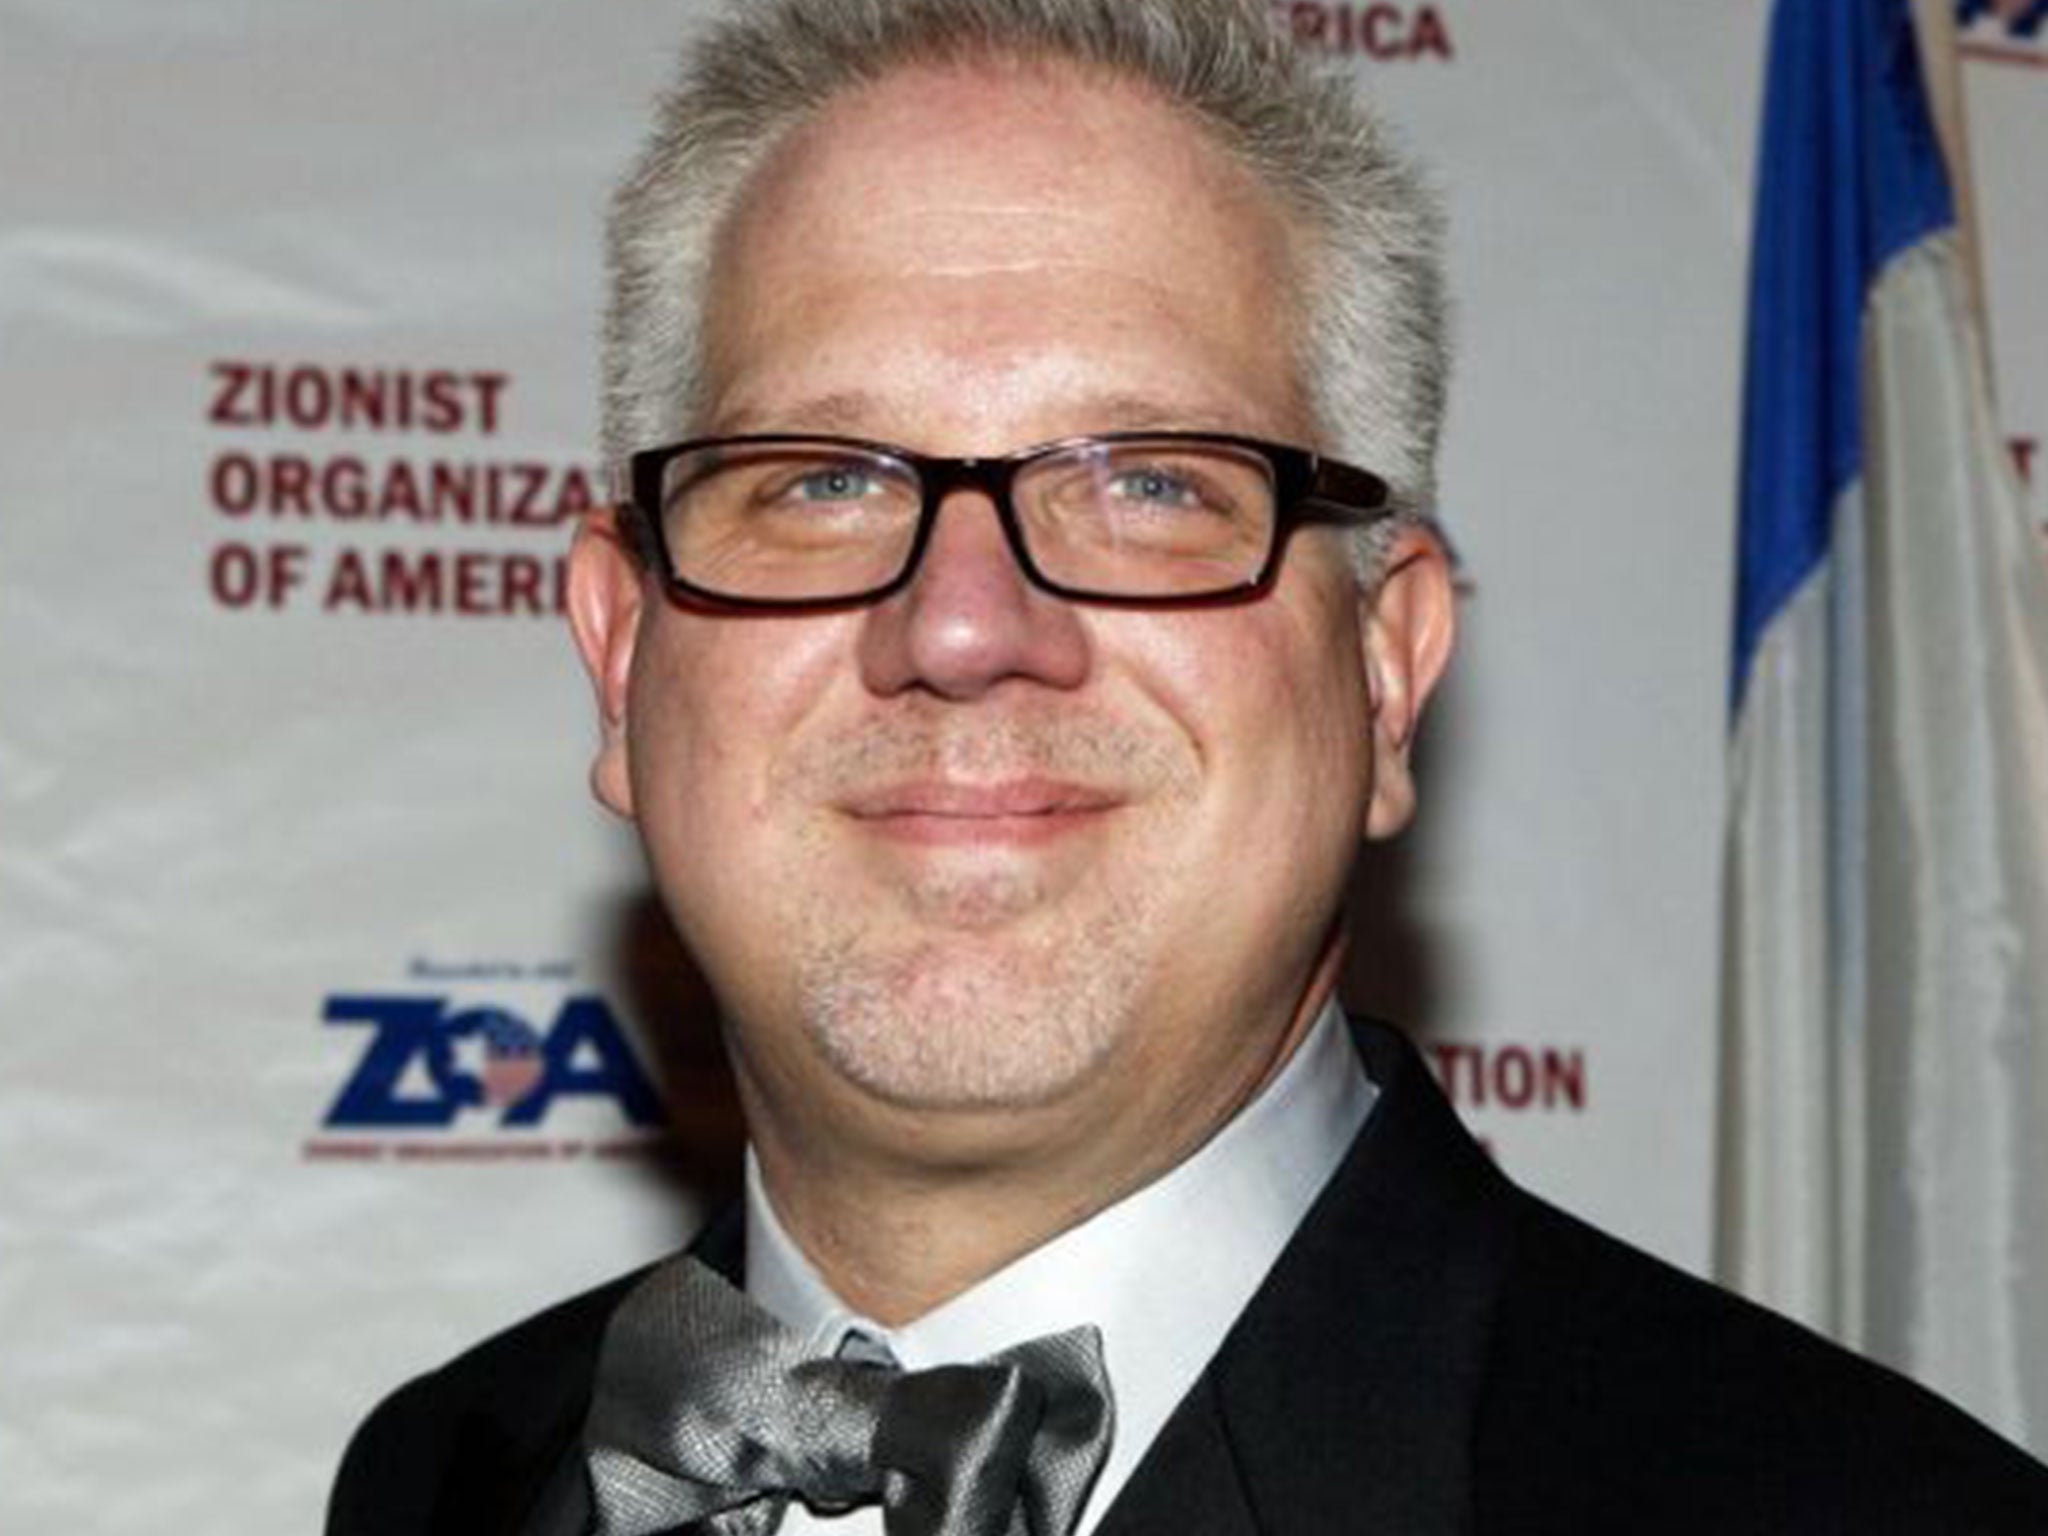 Glenn Beck warns Sean Hannity that Trump loss in 2020 would be &apos;end of US as we know it&apos;